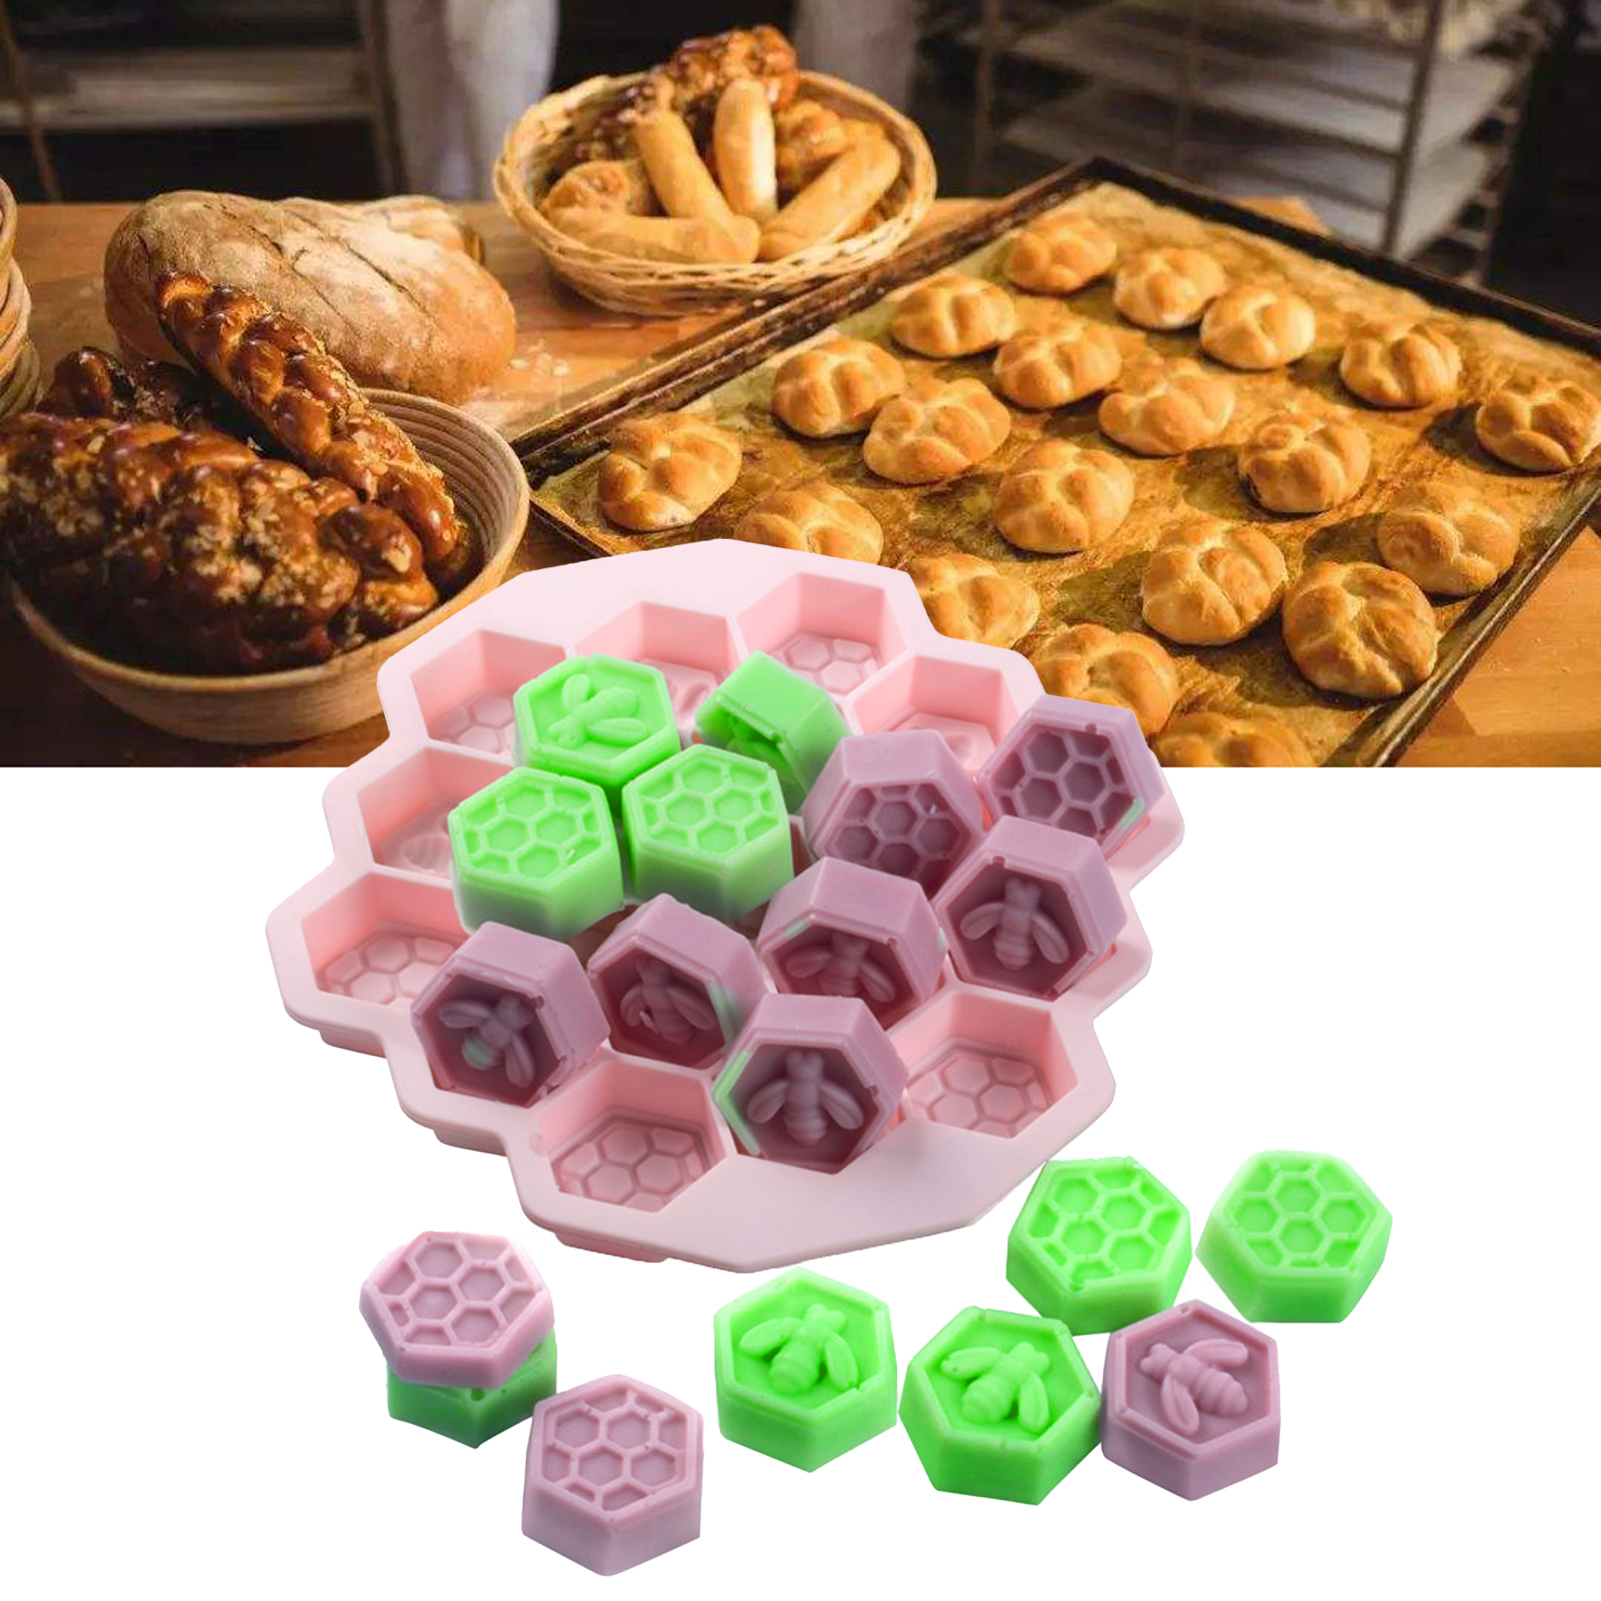 Travelwant Bee Honeycomb Soap Molds, 3D Hexagon Beehive Silicone Cupcake Cups Muffin Baking Pan, Homemade DIY Making Cake Mousse Jelly Candy Chocolate